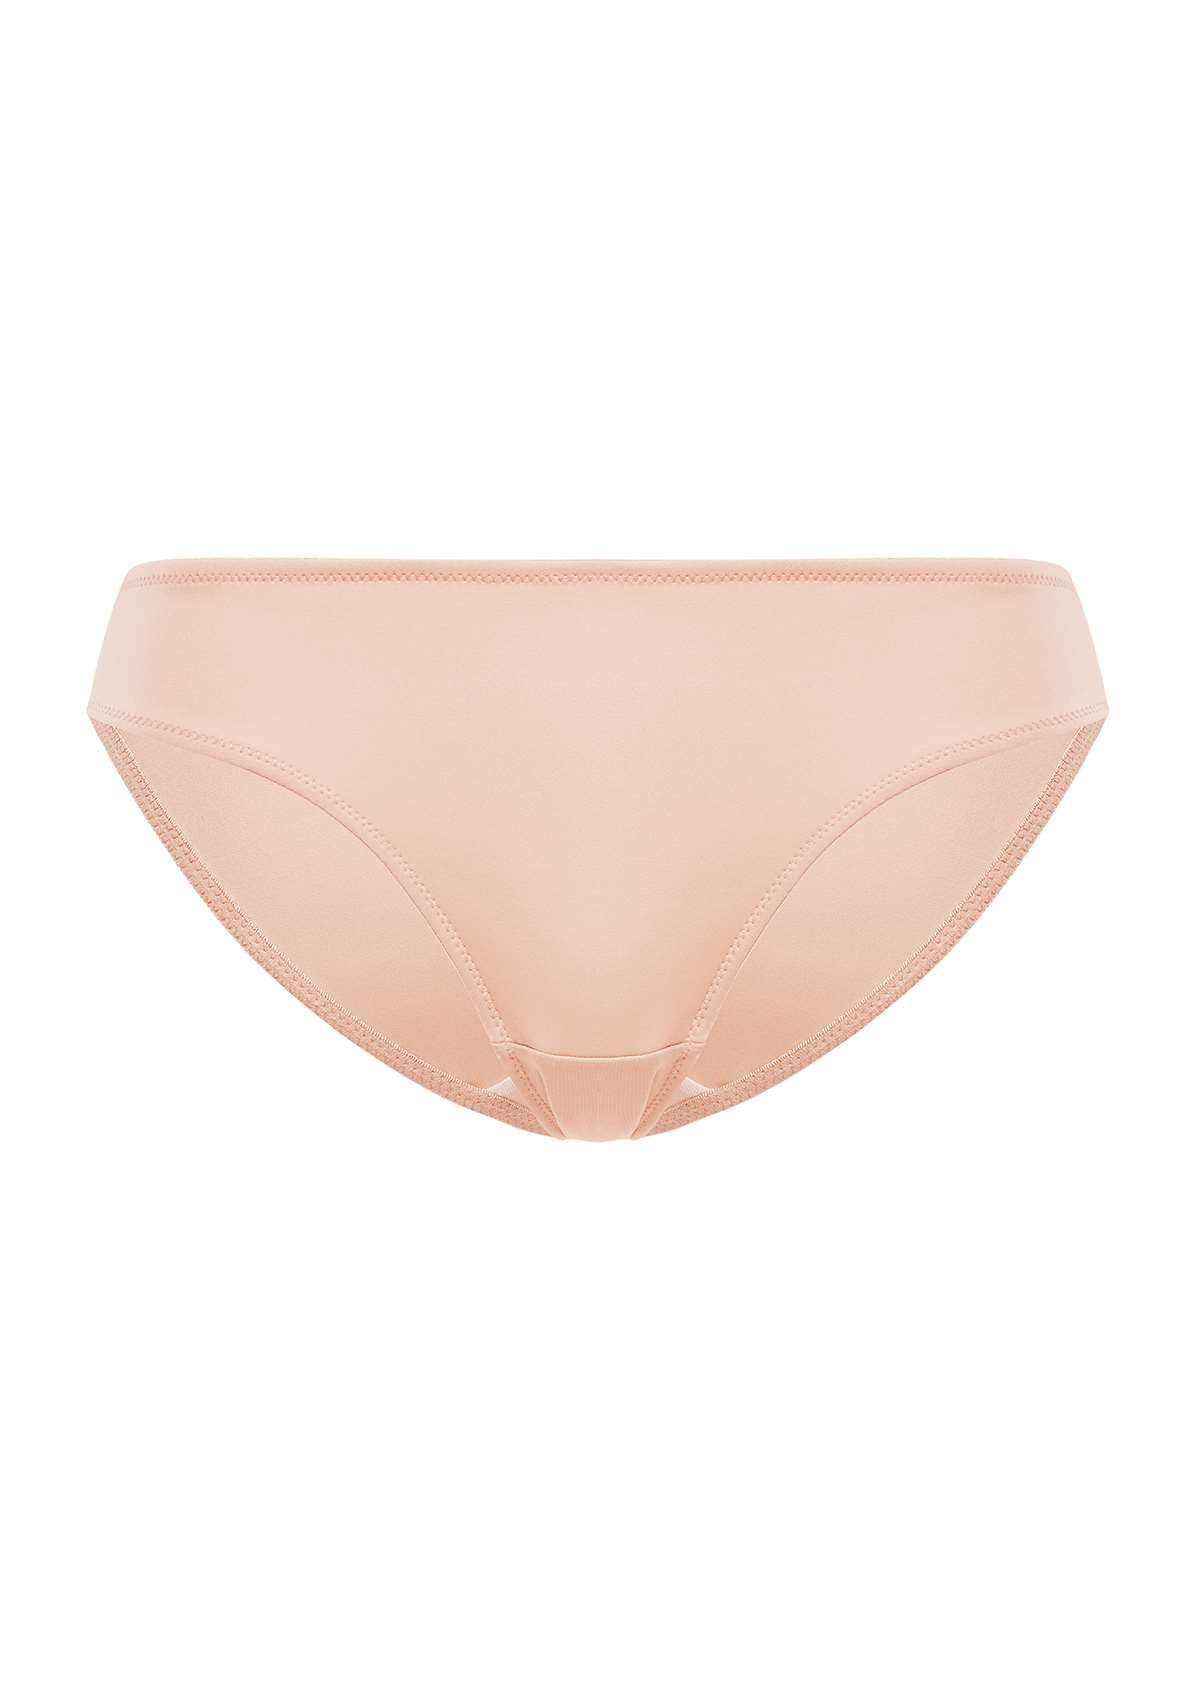 HSIA Patricia Smooth Classic Soft Stretch Panty - Everyday Comfort - XXXL / Light Pink